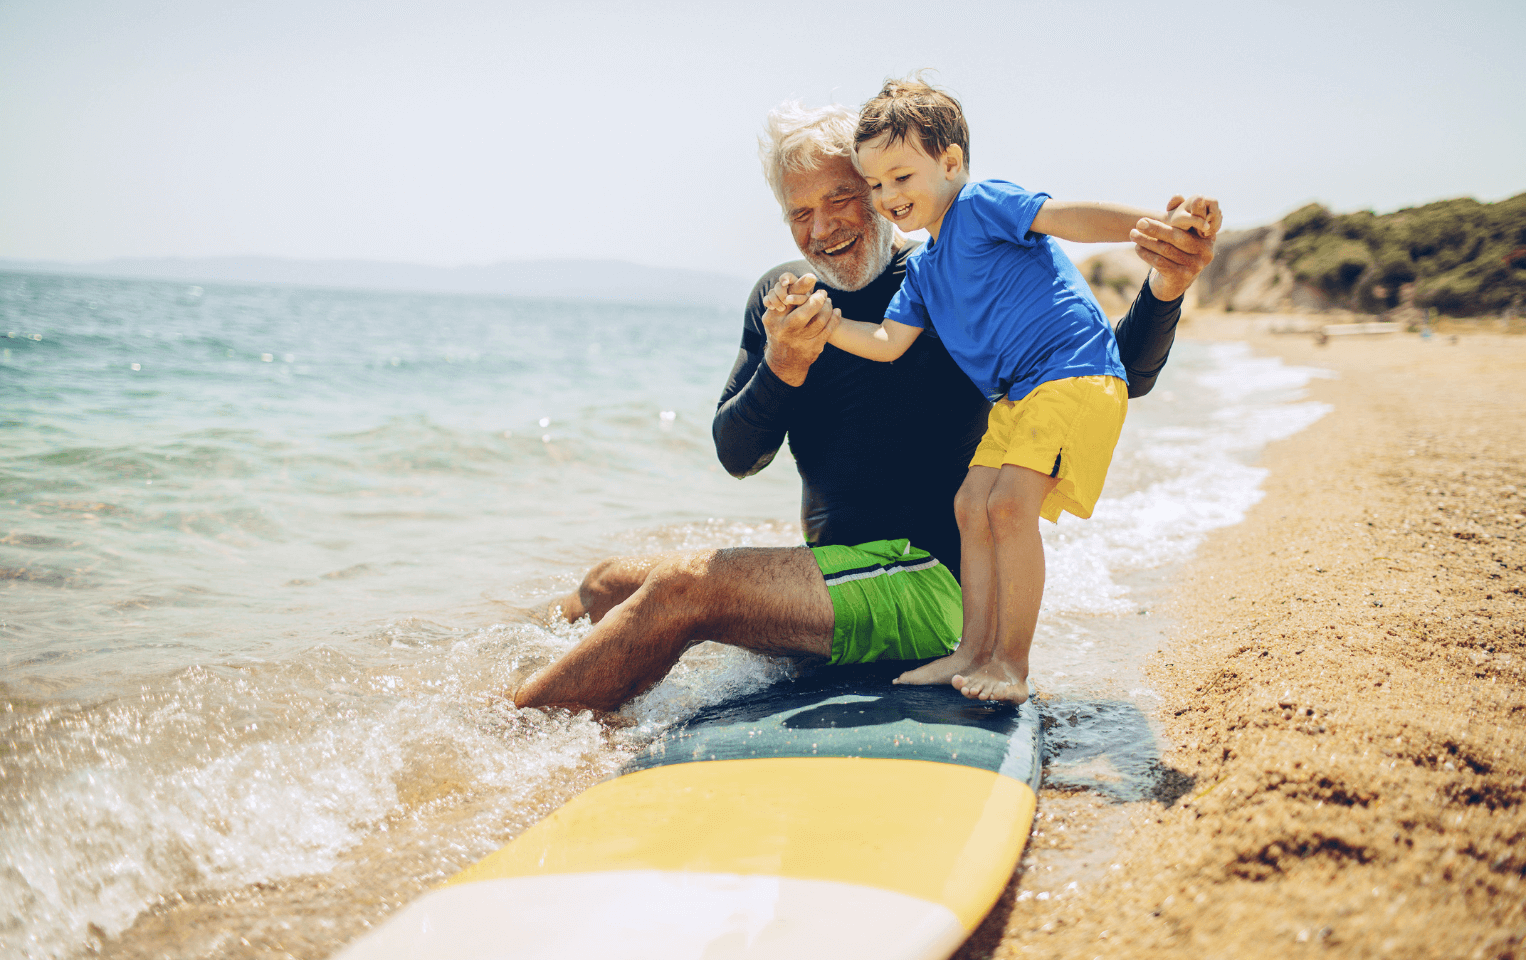 Grandfather teaching grandson how to surf on a beach.